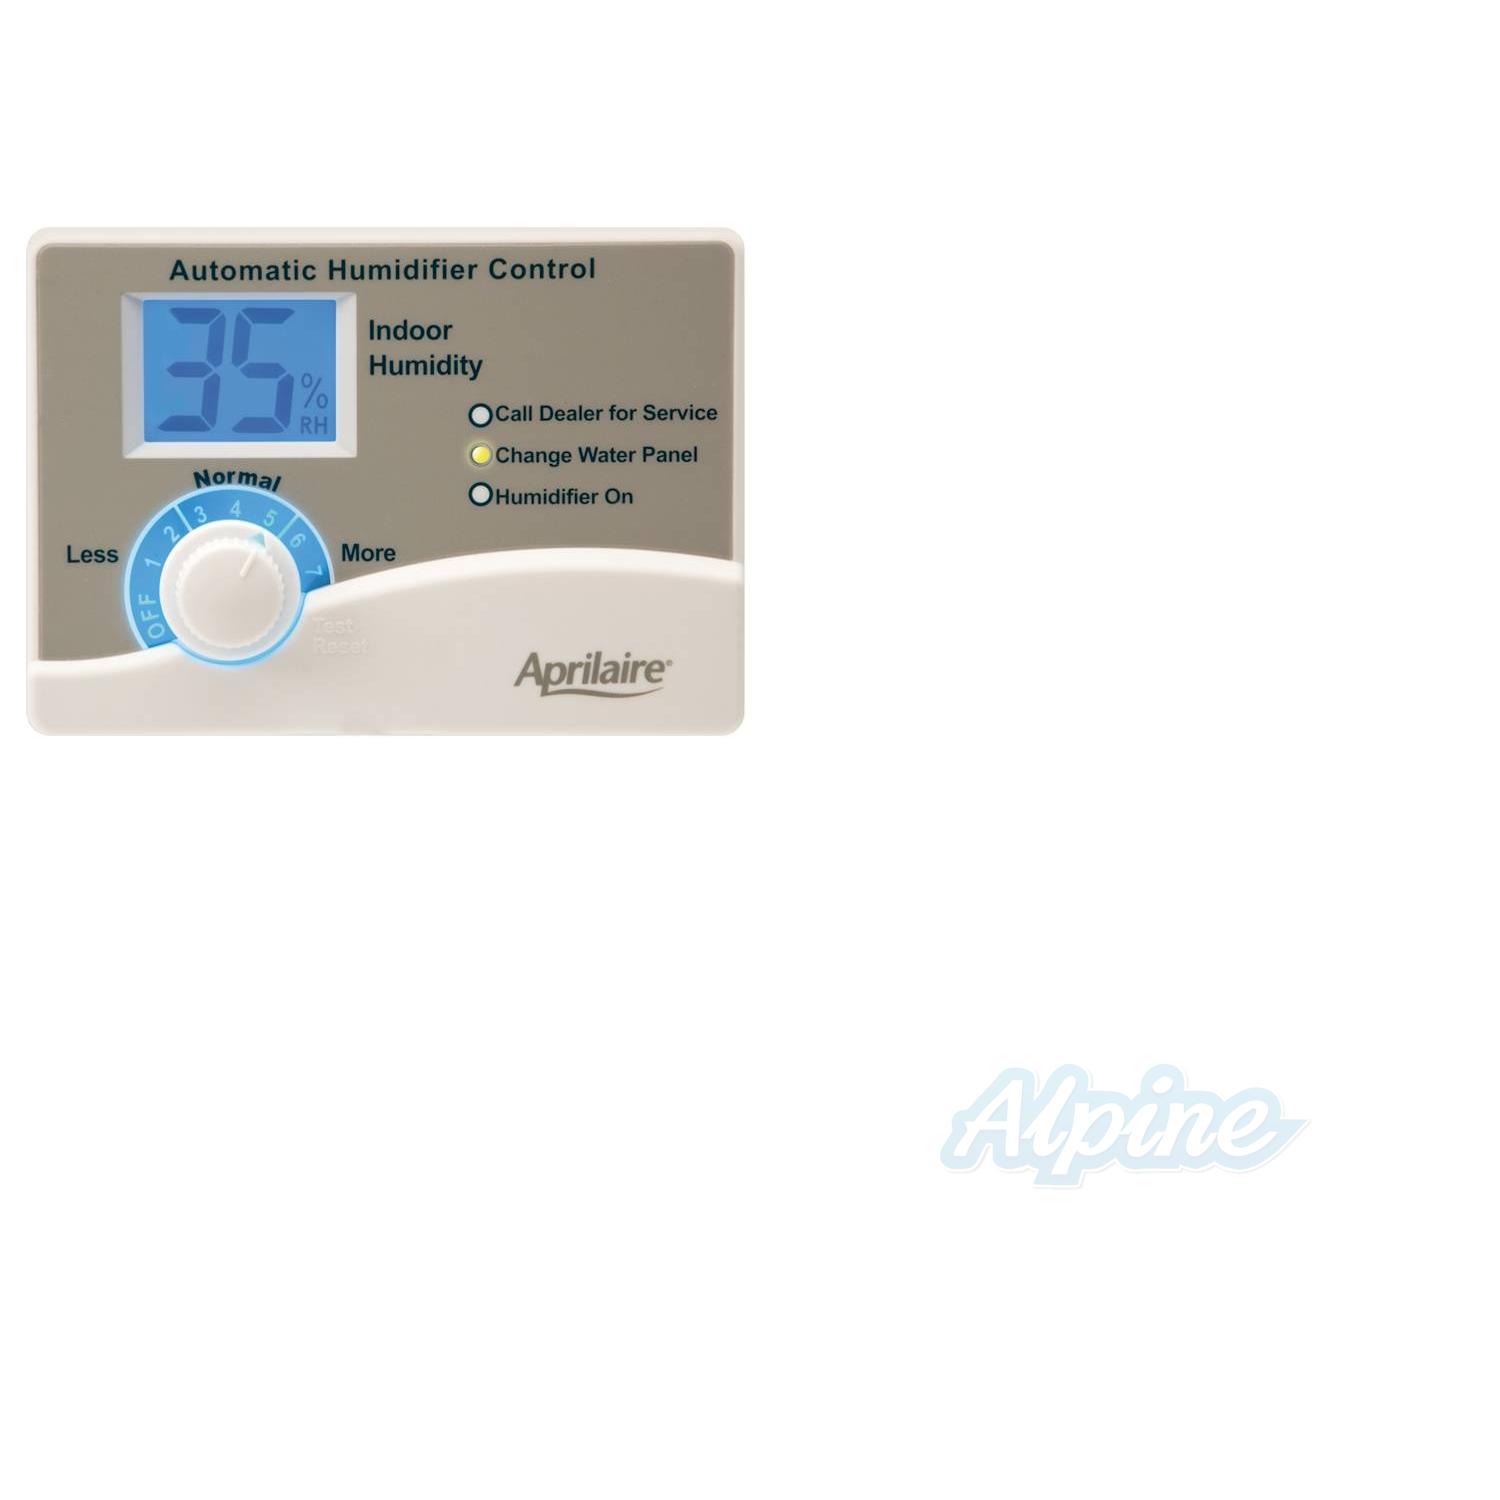 Aprilaire 600 24v Bypass Model W, Aprilaire 600 Humidistat Wiring Diagram